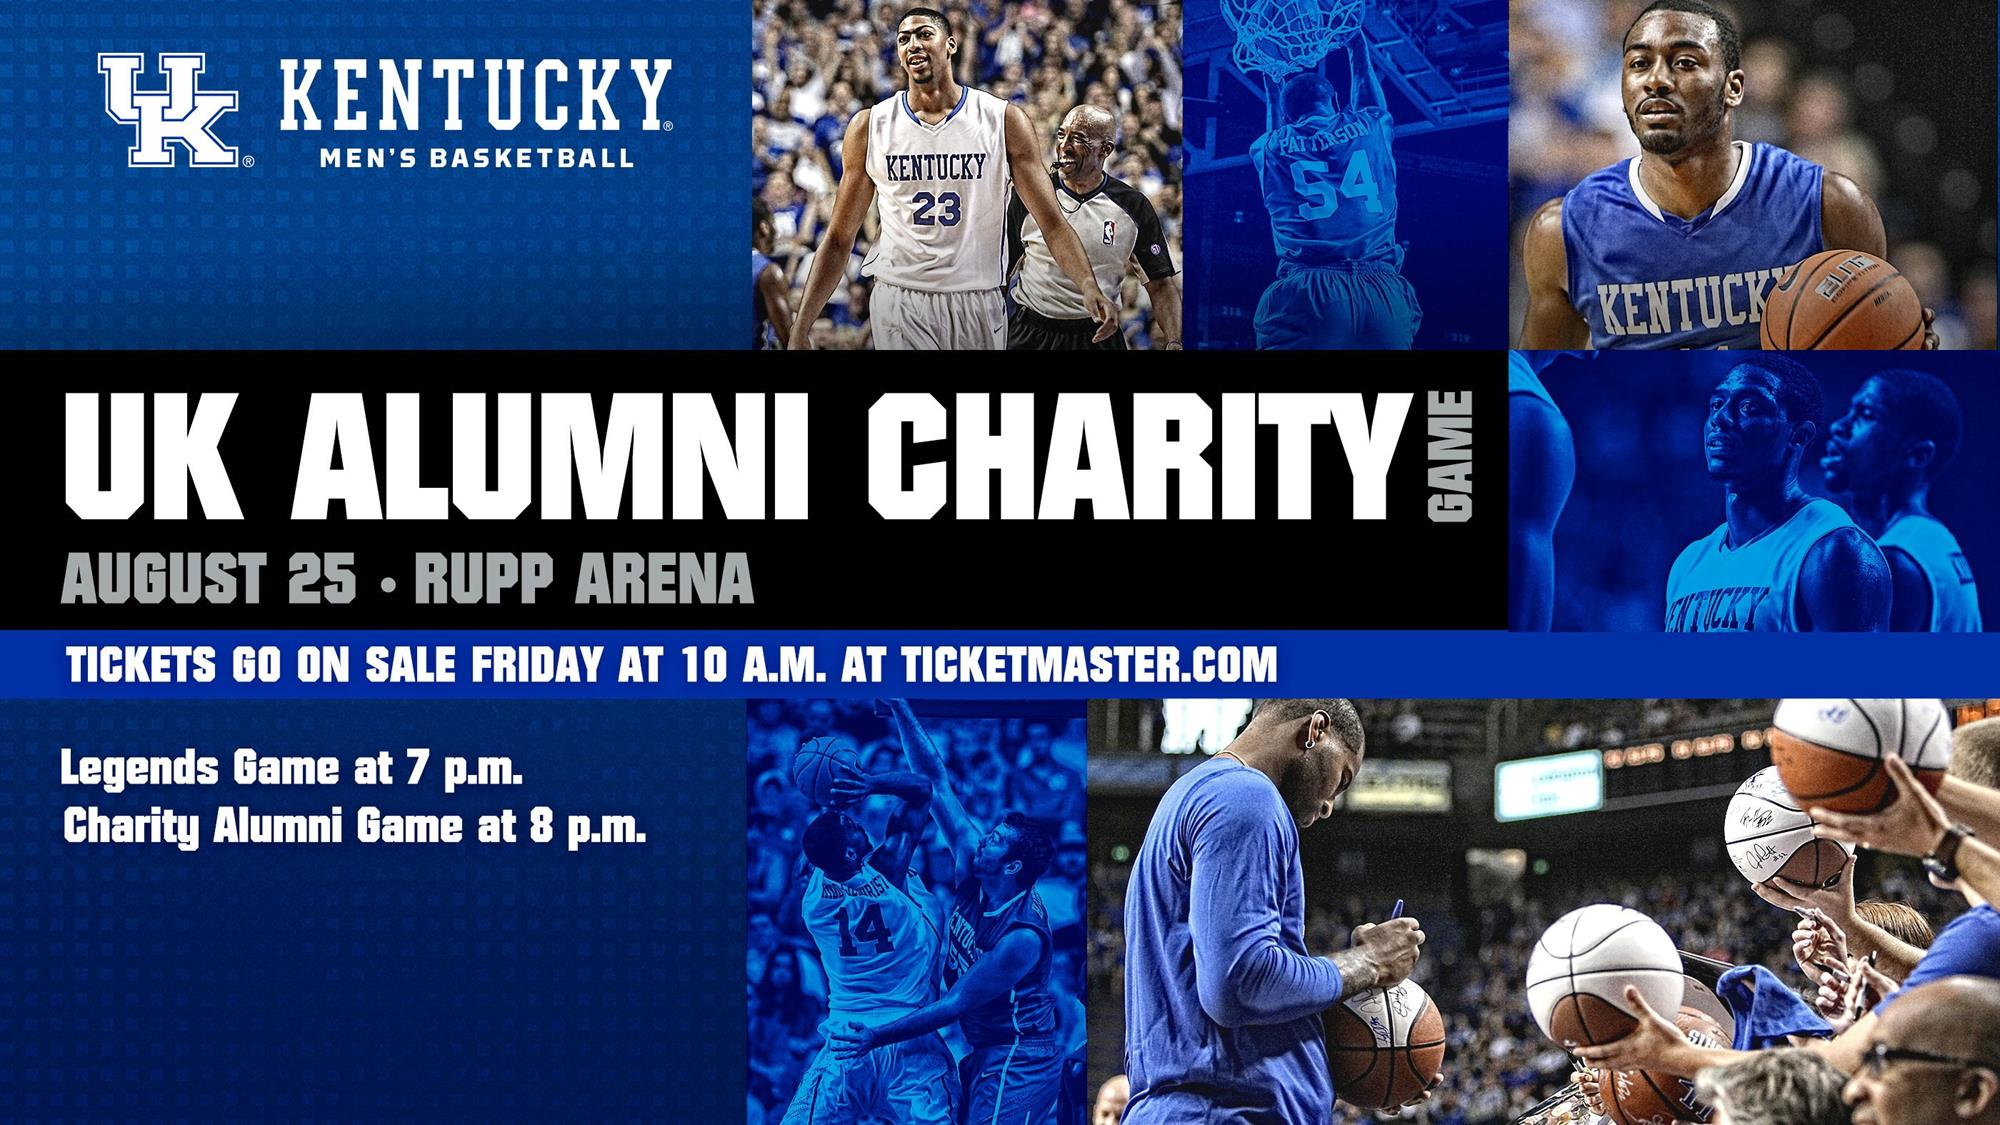 UK Alumni Charity Game Set for Aug. 25 in Rupp Arena